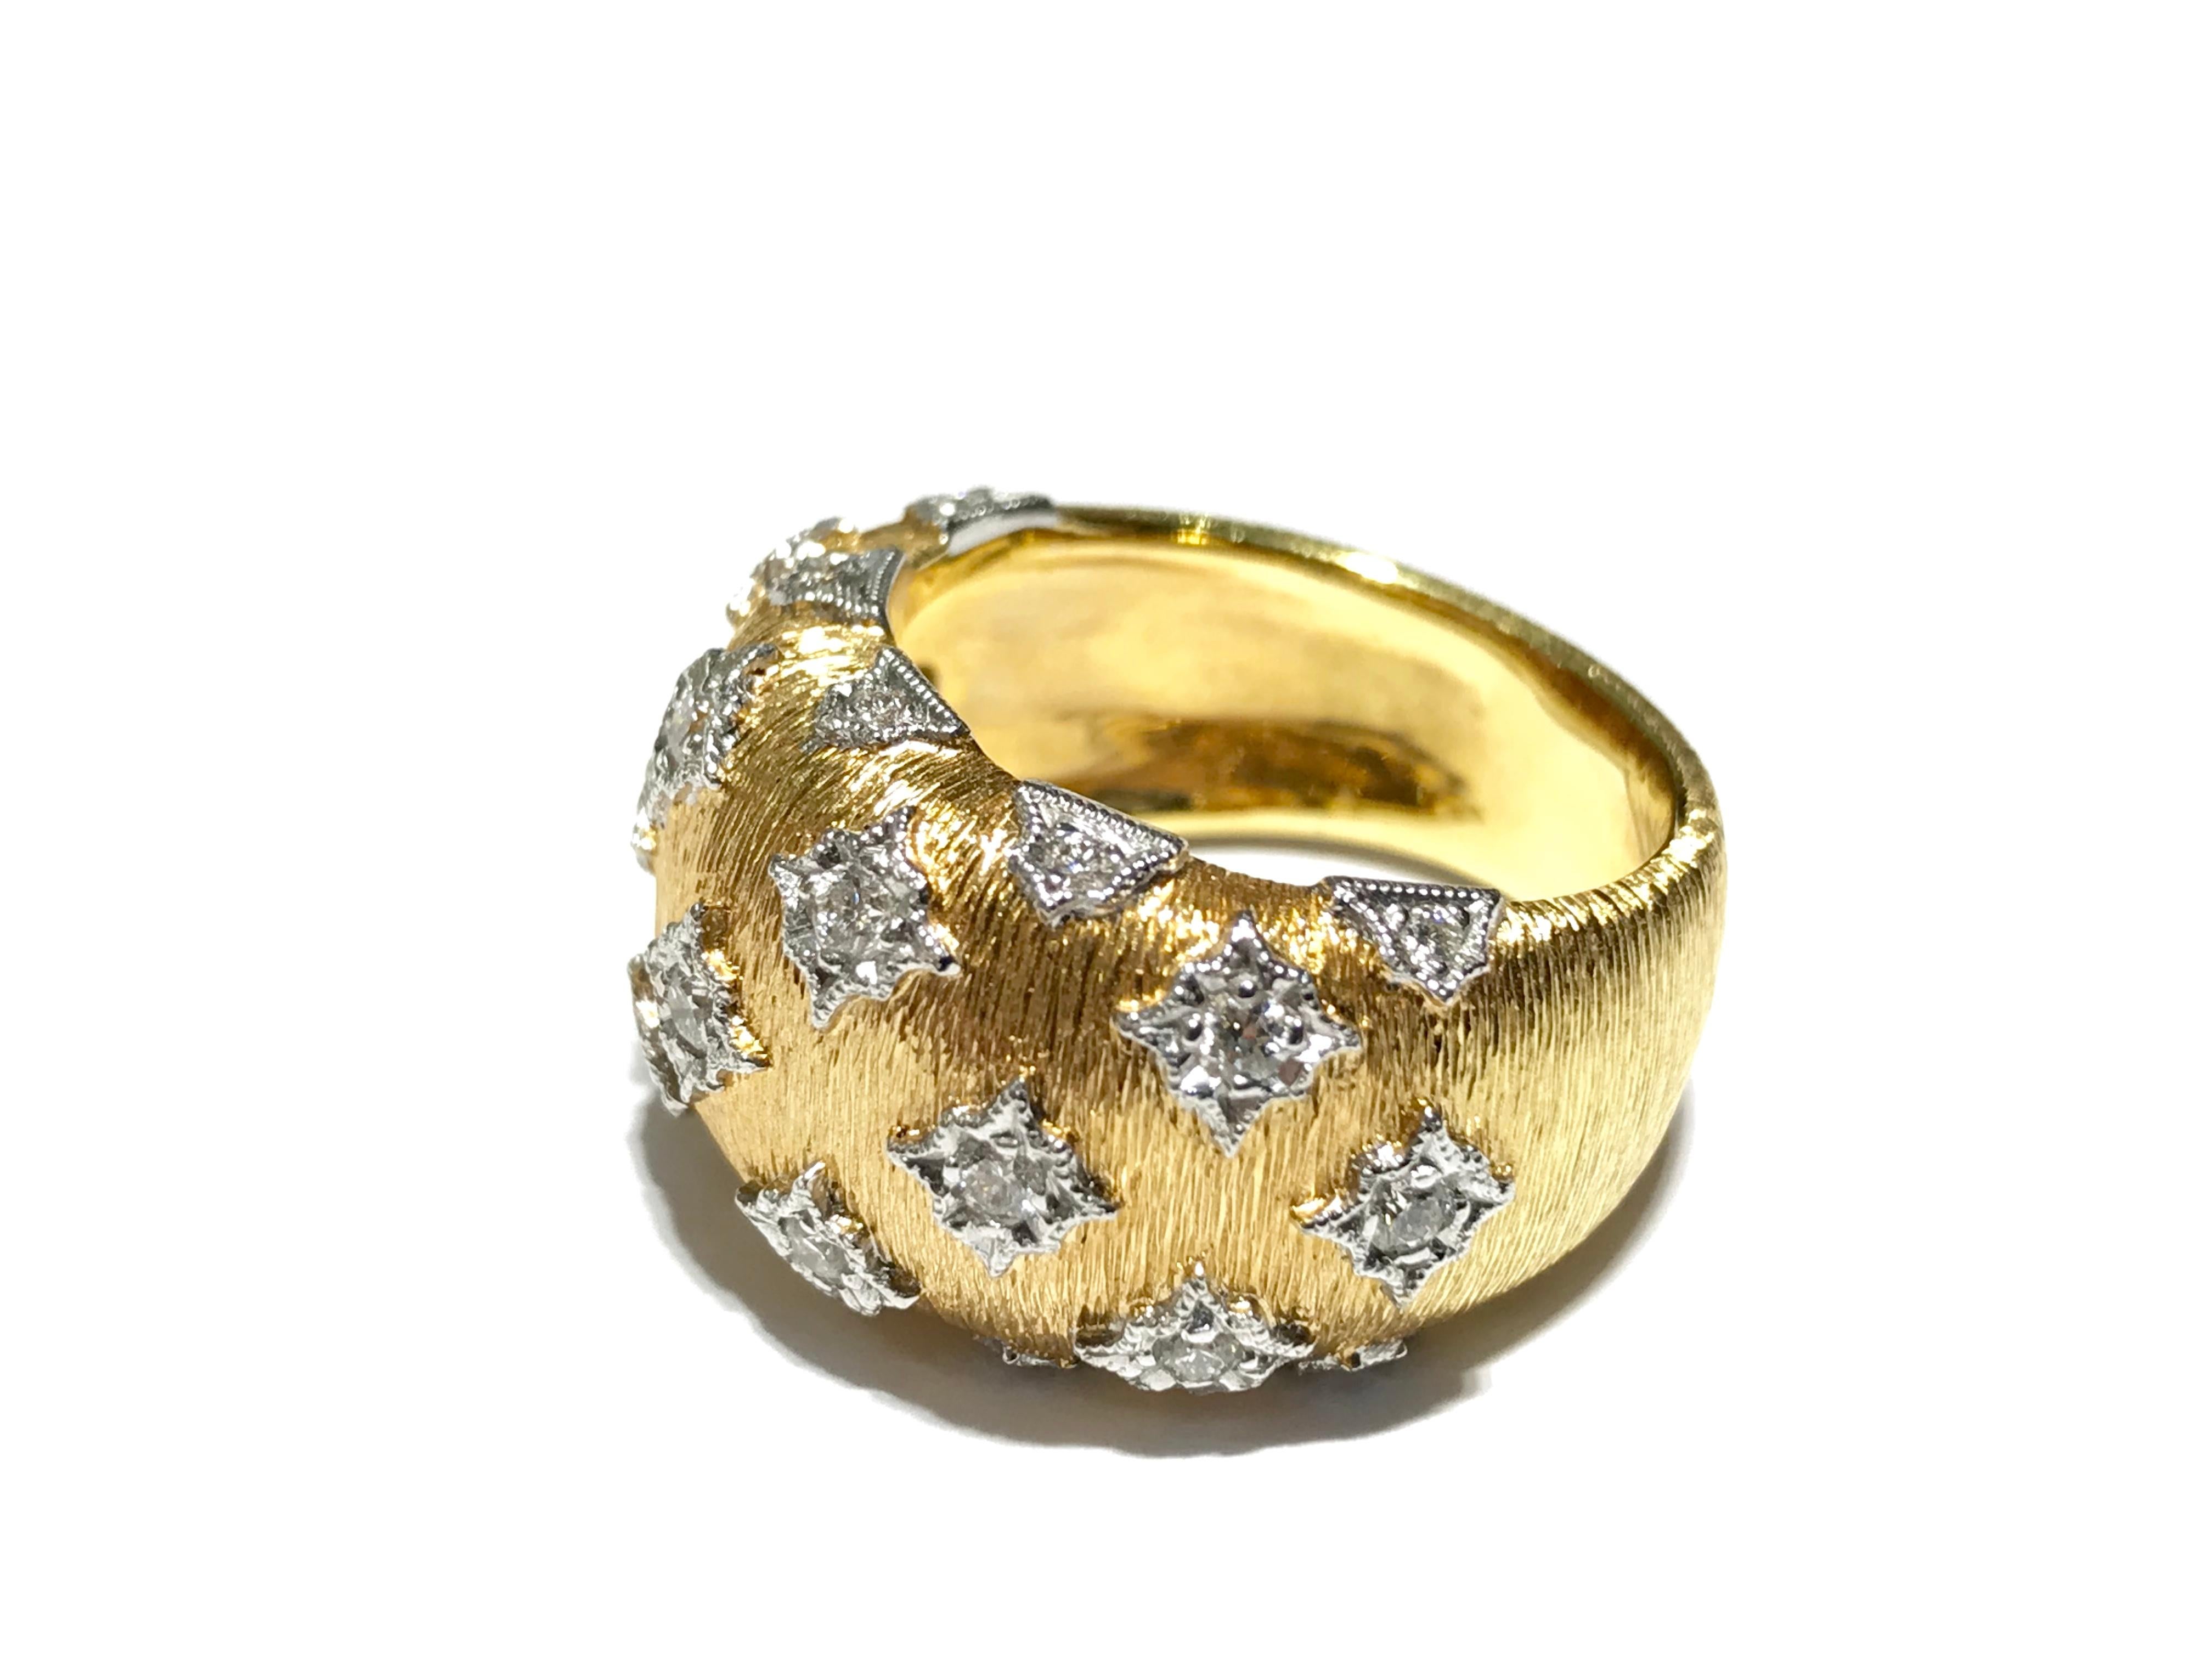 Buccellati inspired ring in 18kyg with 23 diamonds 0.47ct dia brushed finish
Hand crafted Buccellati inspired ring 